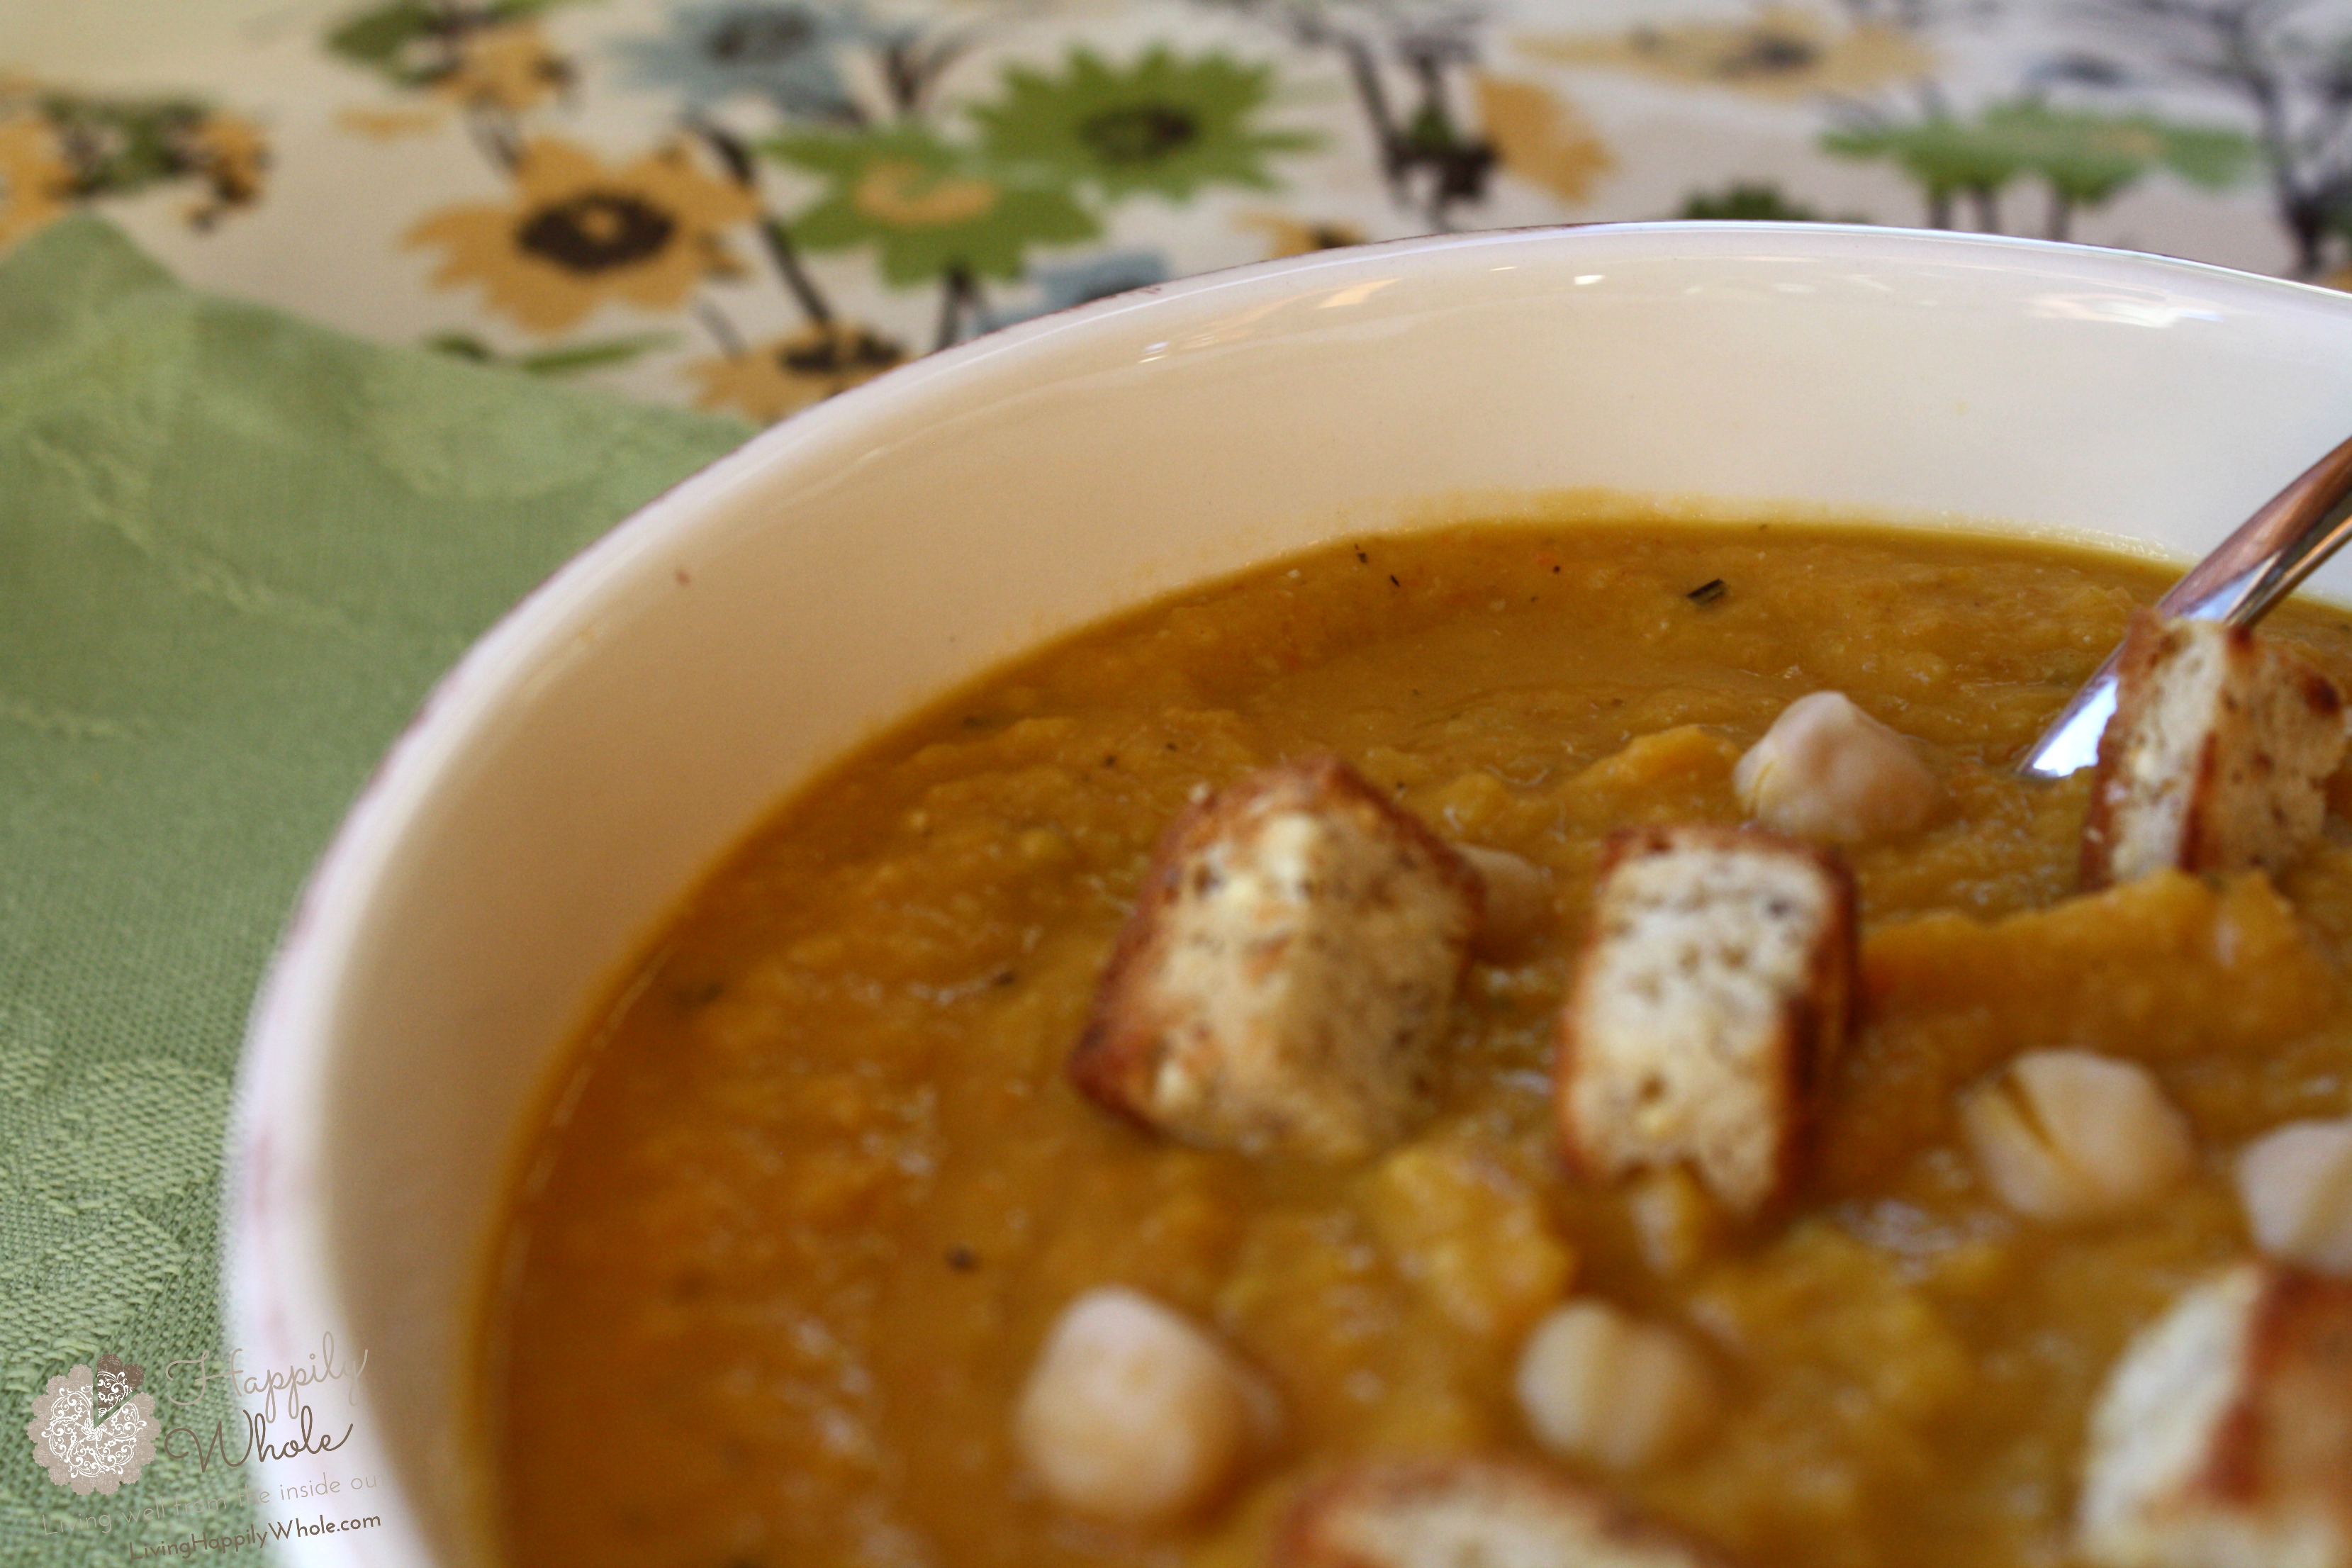 Creamy Carrot Soup with Chick Peas and Croutons